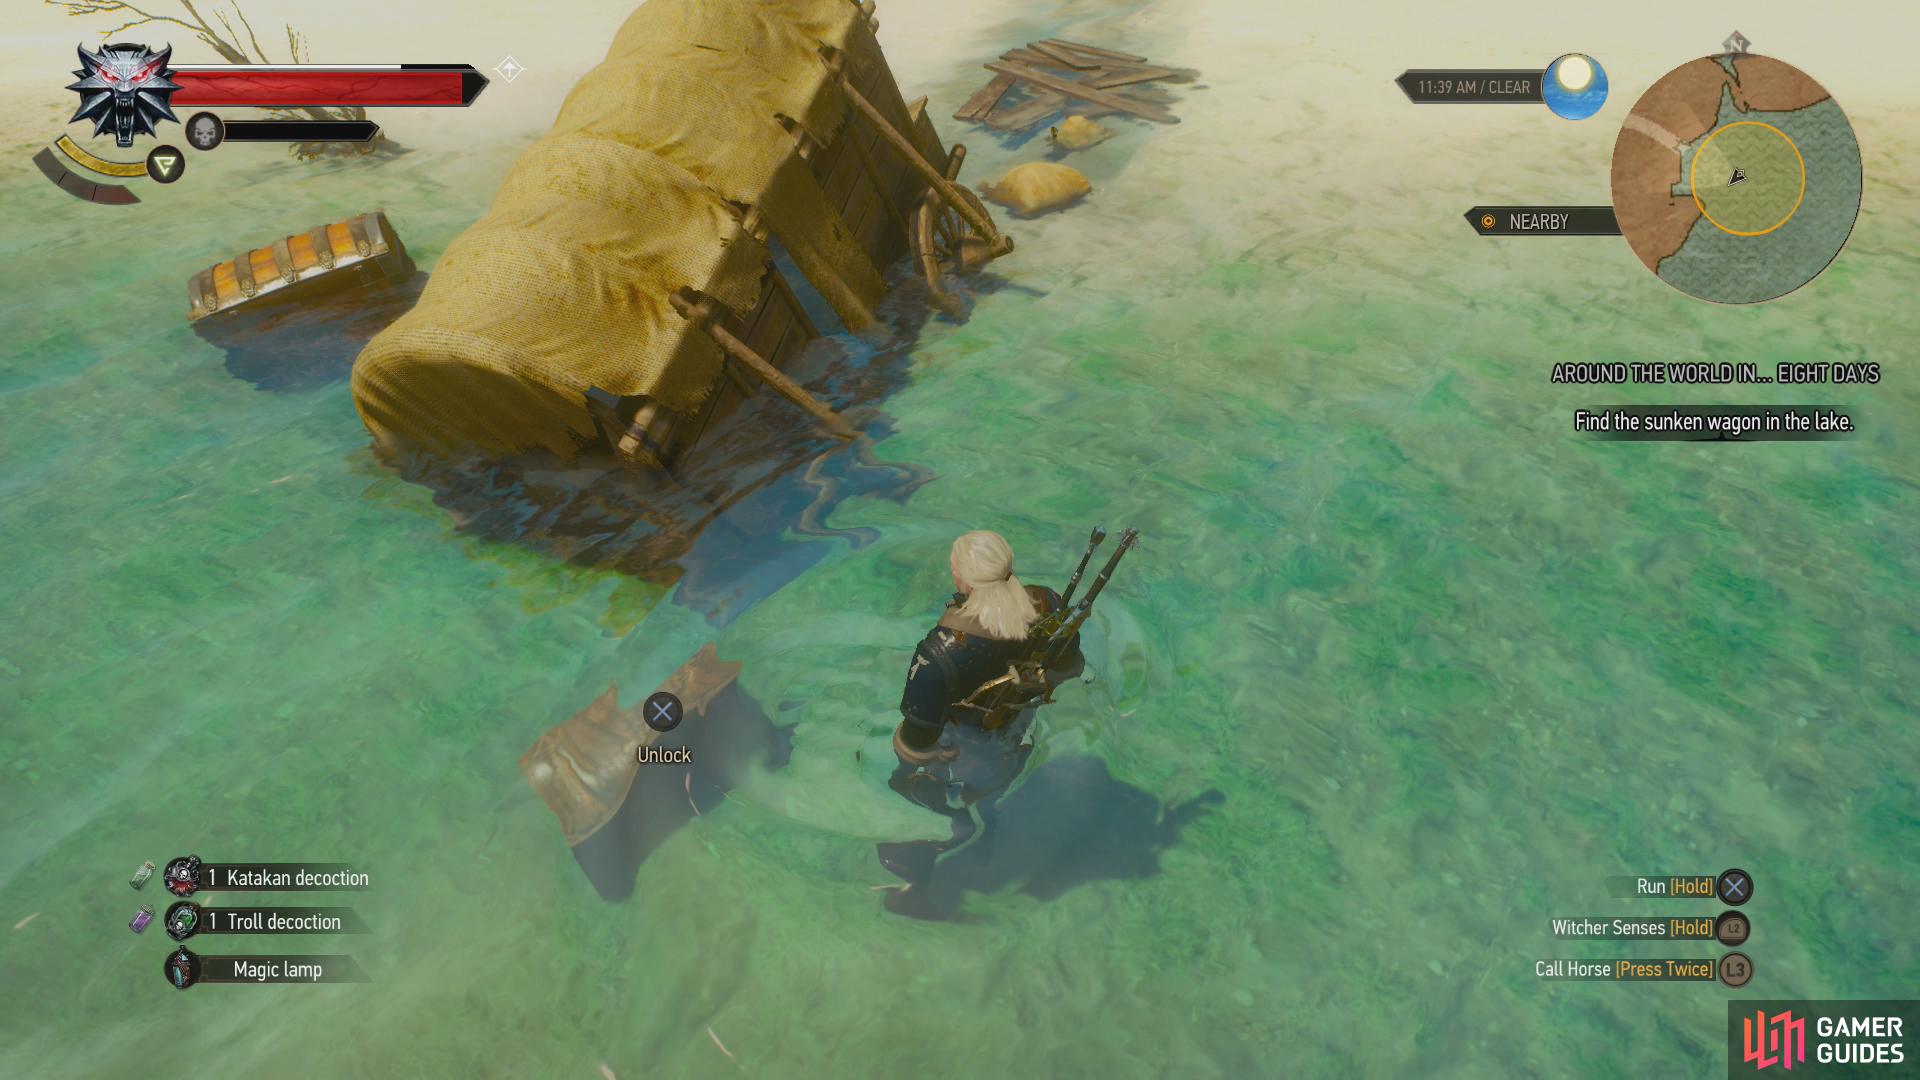 then dispatch another pair of bandits and loot a submerged chest.